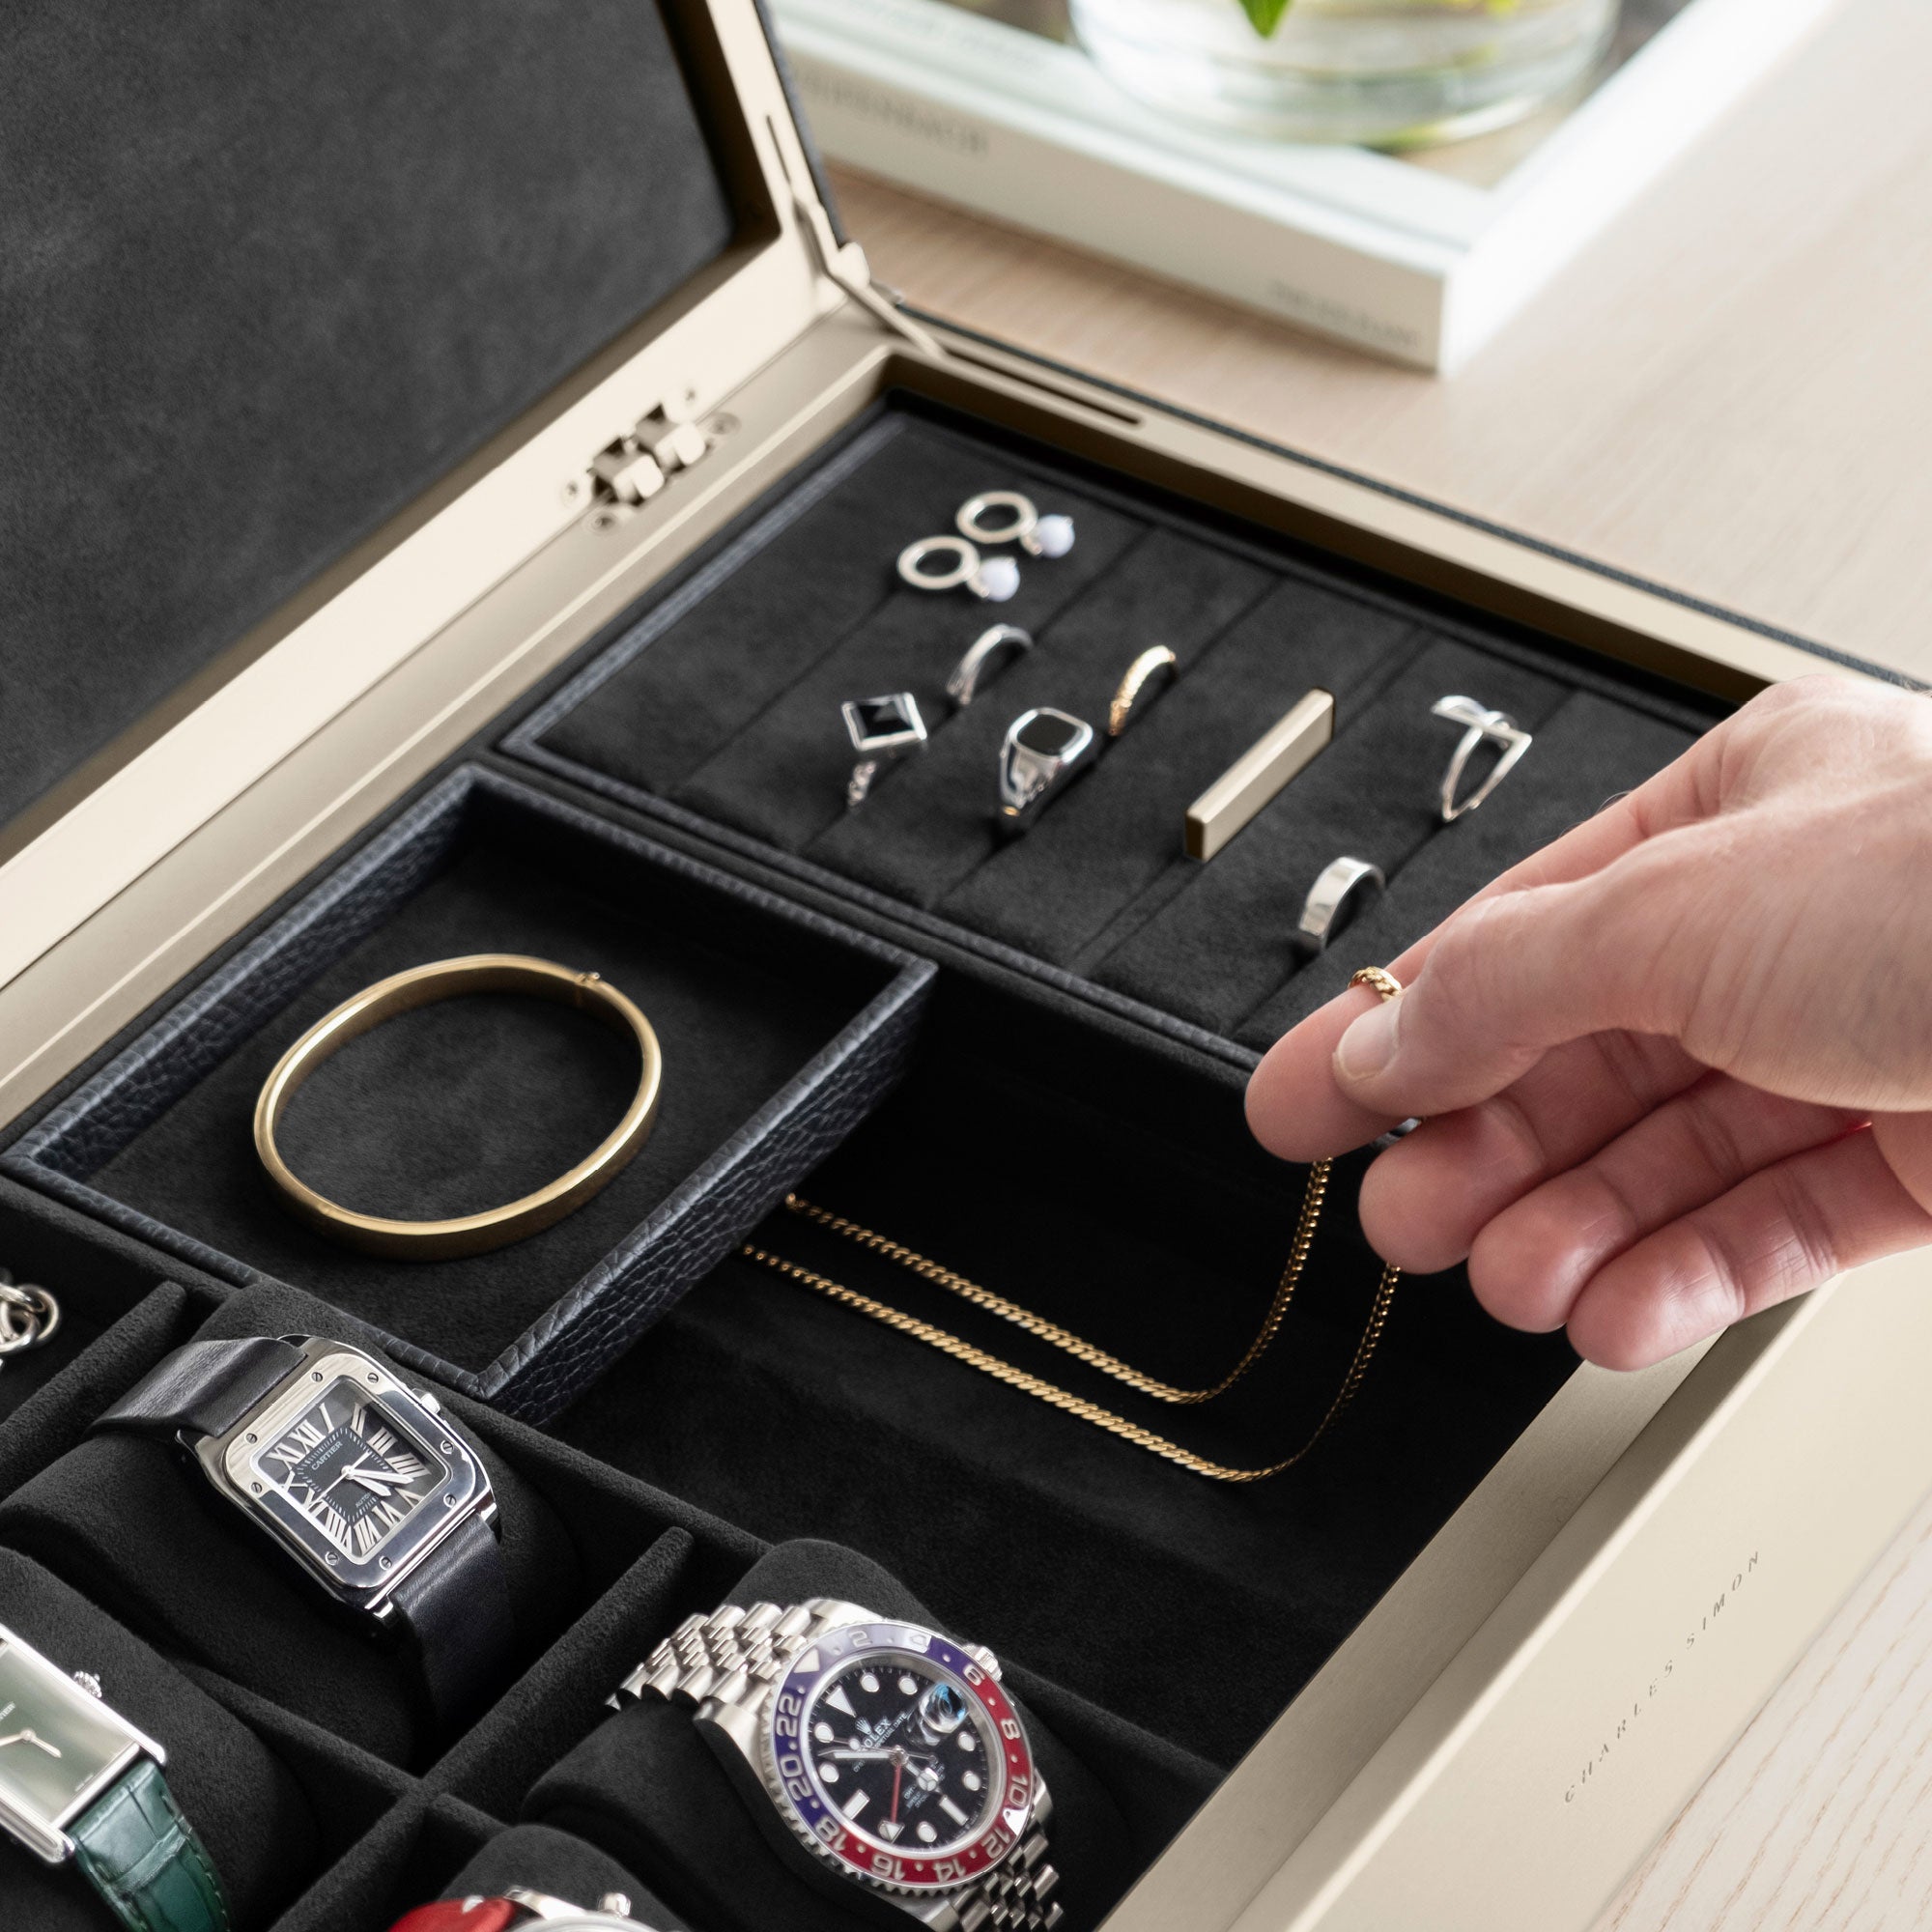 Detail photo of man taking gold necklace from the organization compartment of his gold Taylor 4 Watch and jewelry box in black leather.